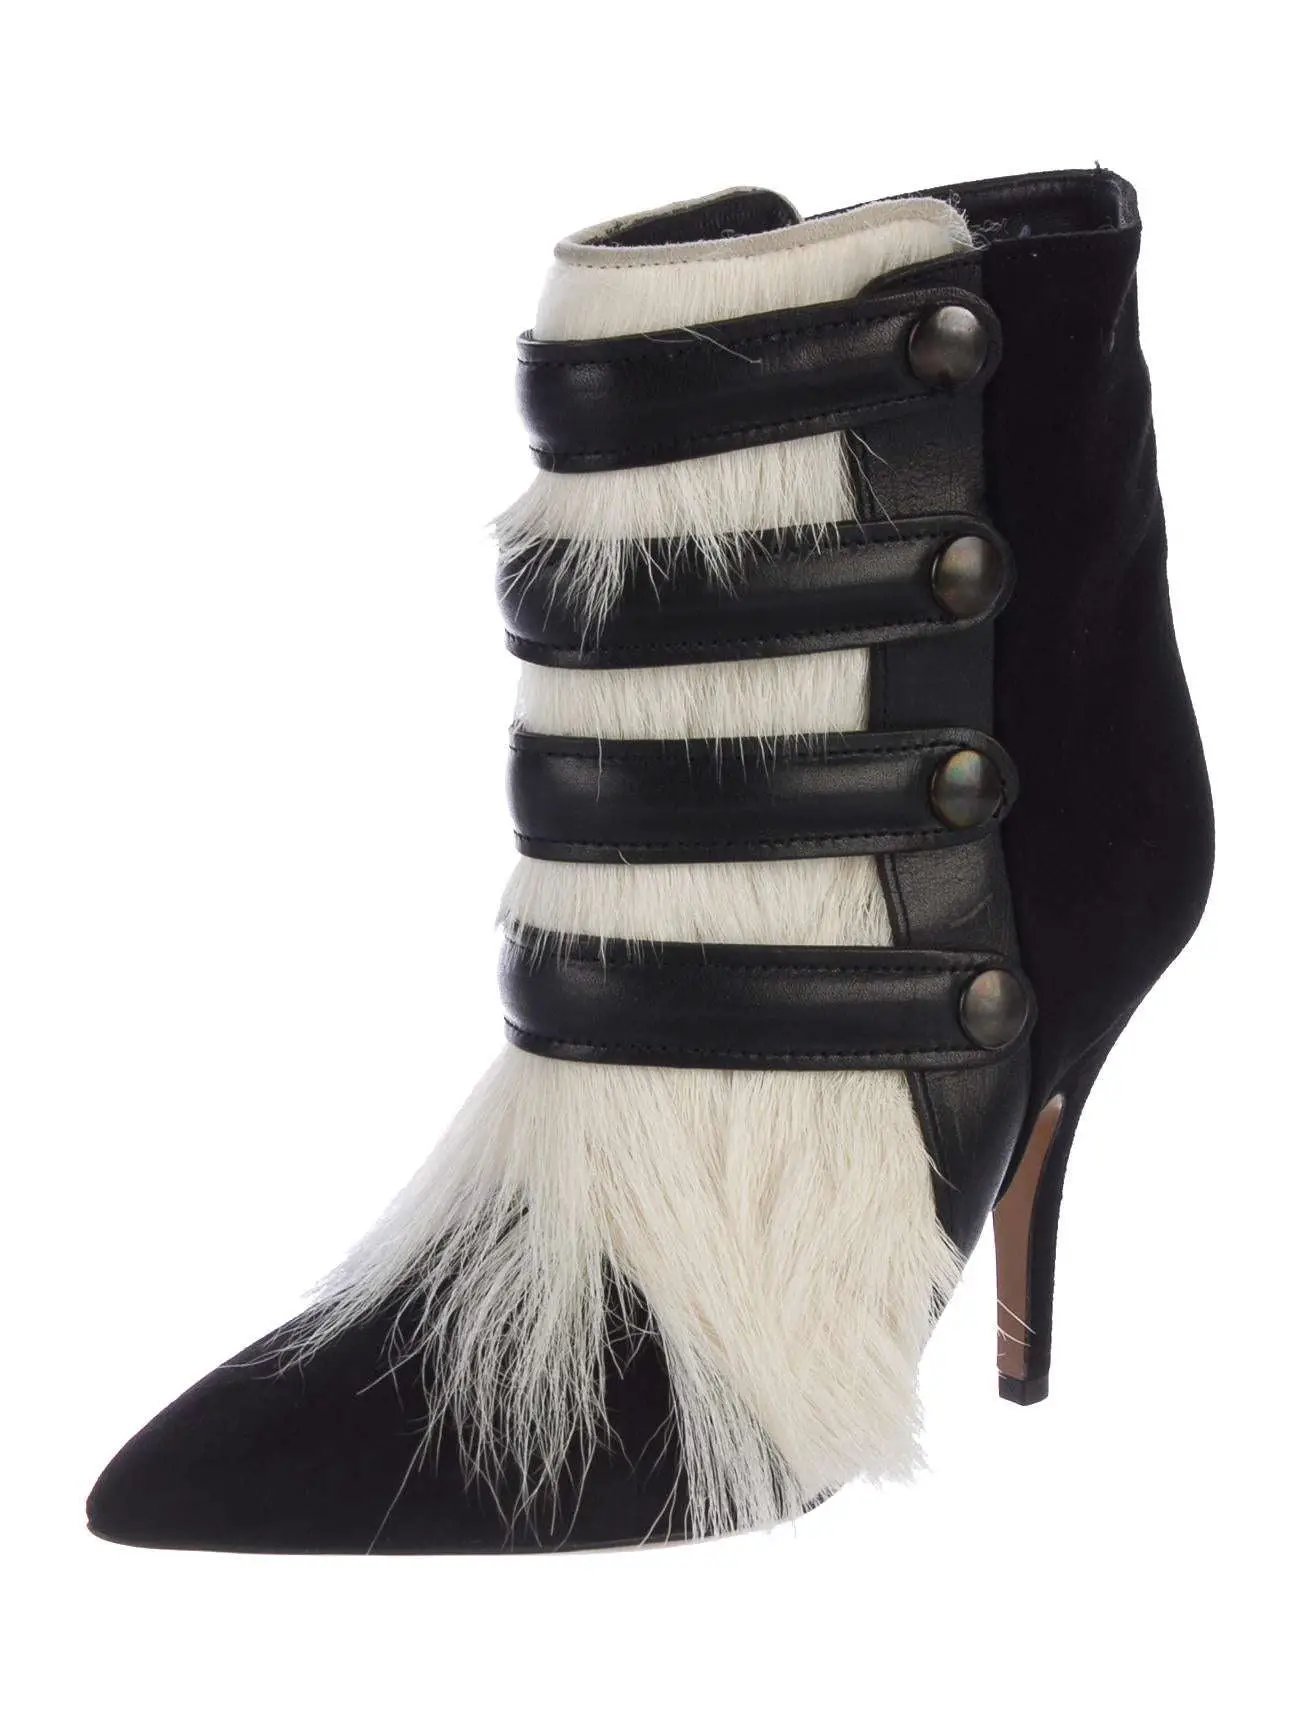 Isabel Marant Goat Hair Ankle Boots w/ Tags